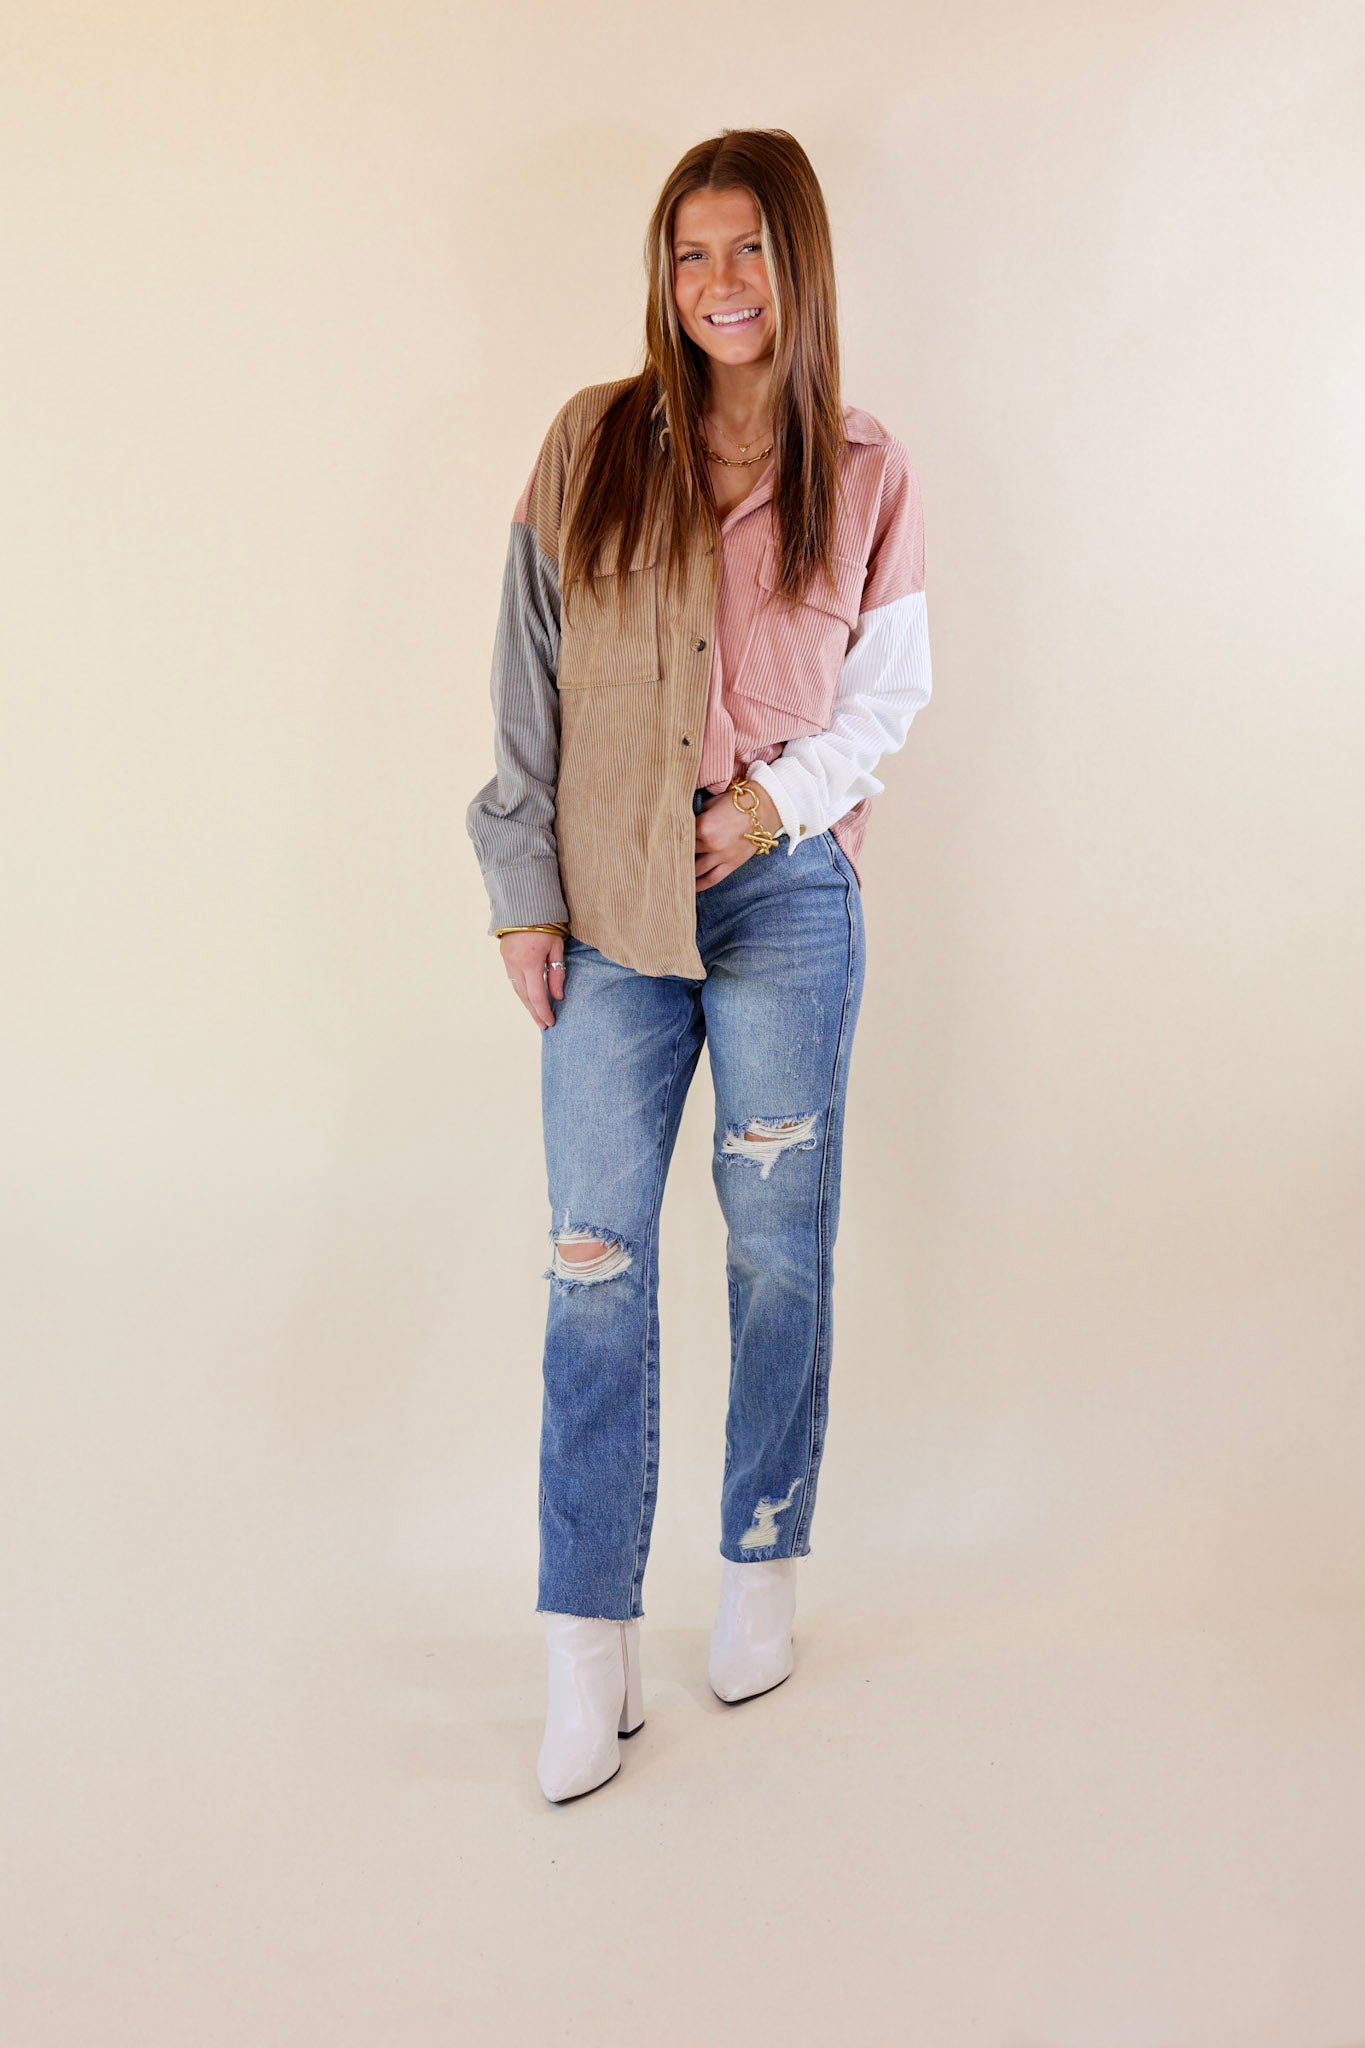 Cozy Perk Button Up Color Block Corduroy Shacket in Blush Pink and Tan - Giddy Up Glamour Boutique